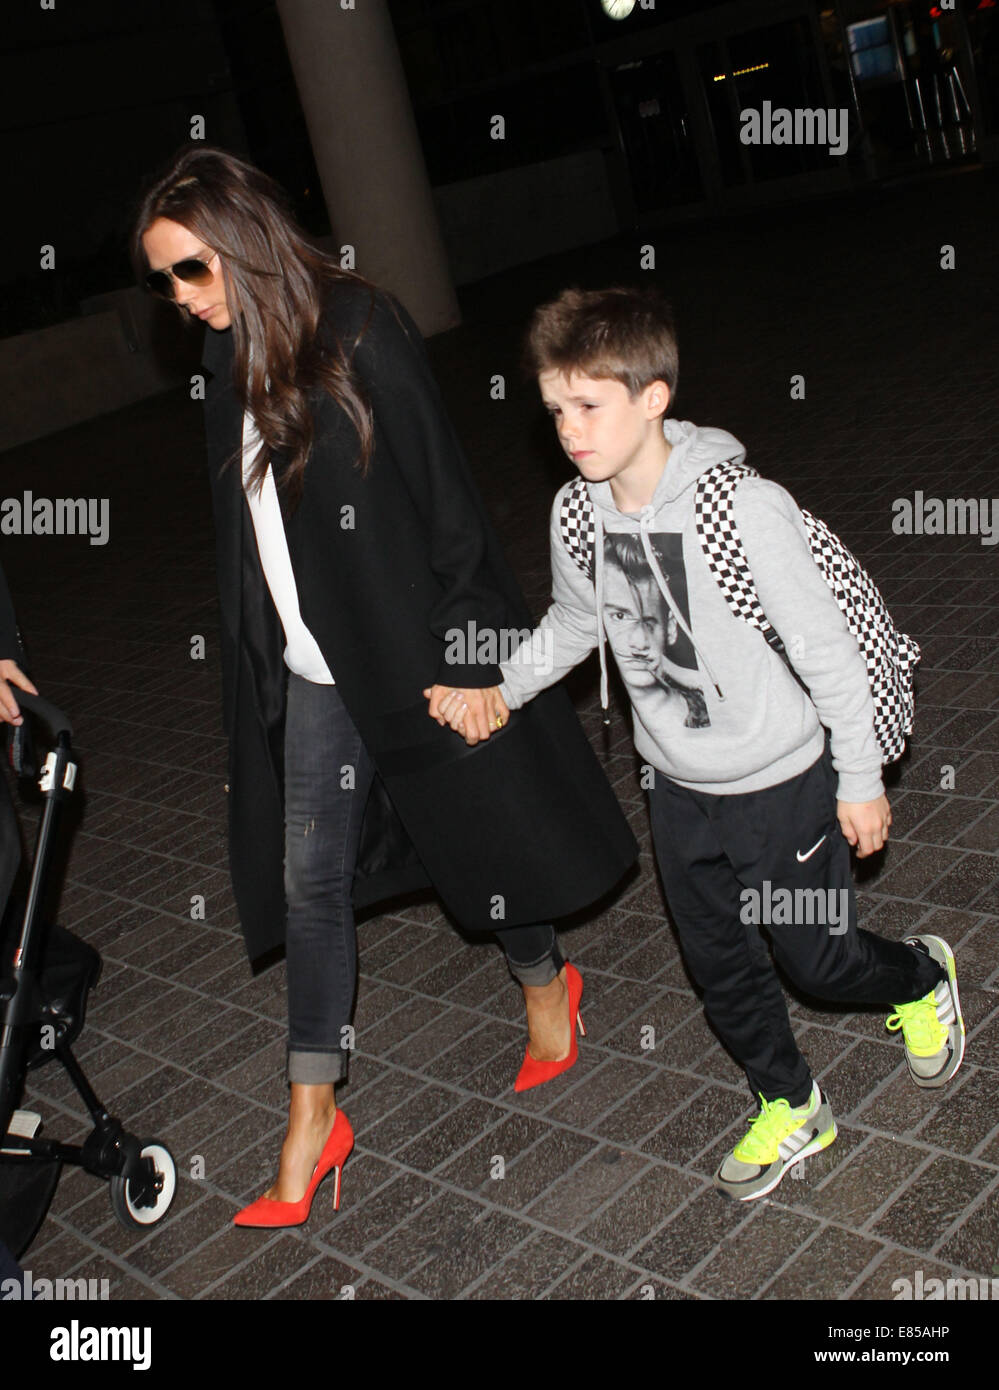 Victoria Beckham with her children at Los Angeles International Airport (LAX)  Featuring: Victoria Beckham,Cruz Beckham Where: Los Angeles, California, United States When: 29 Mar 2014 Stock Photo